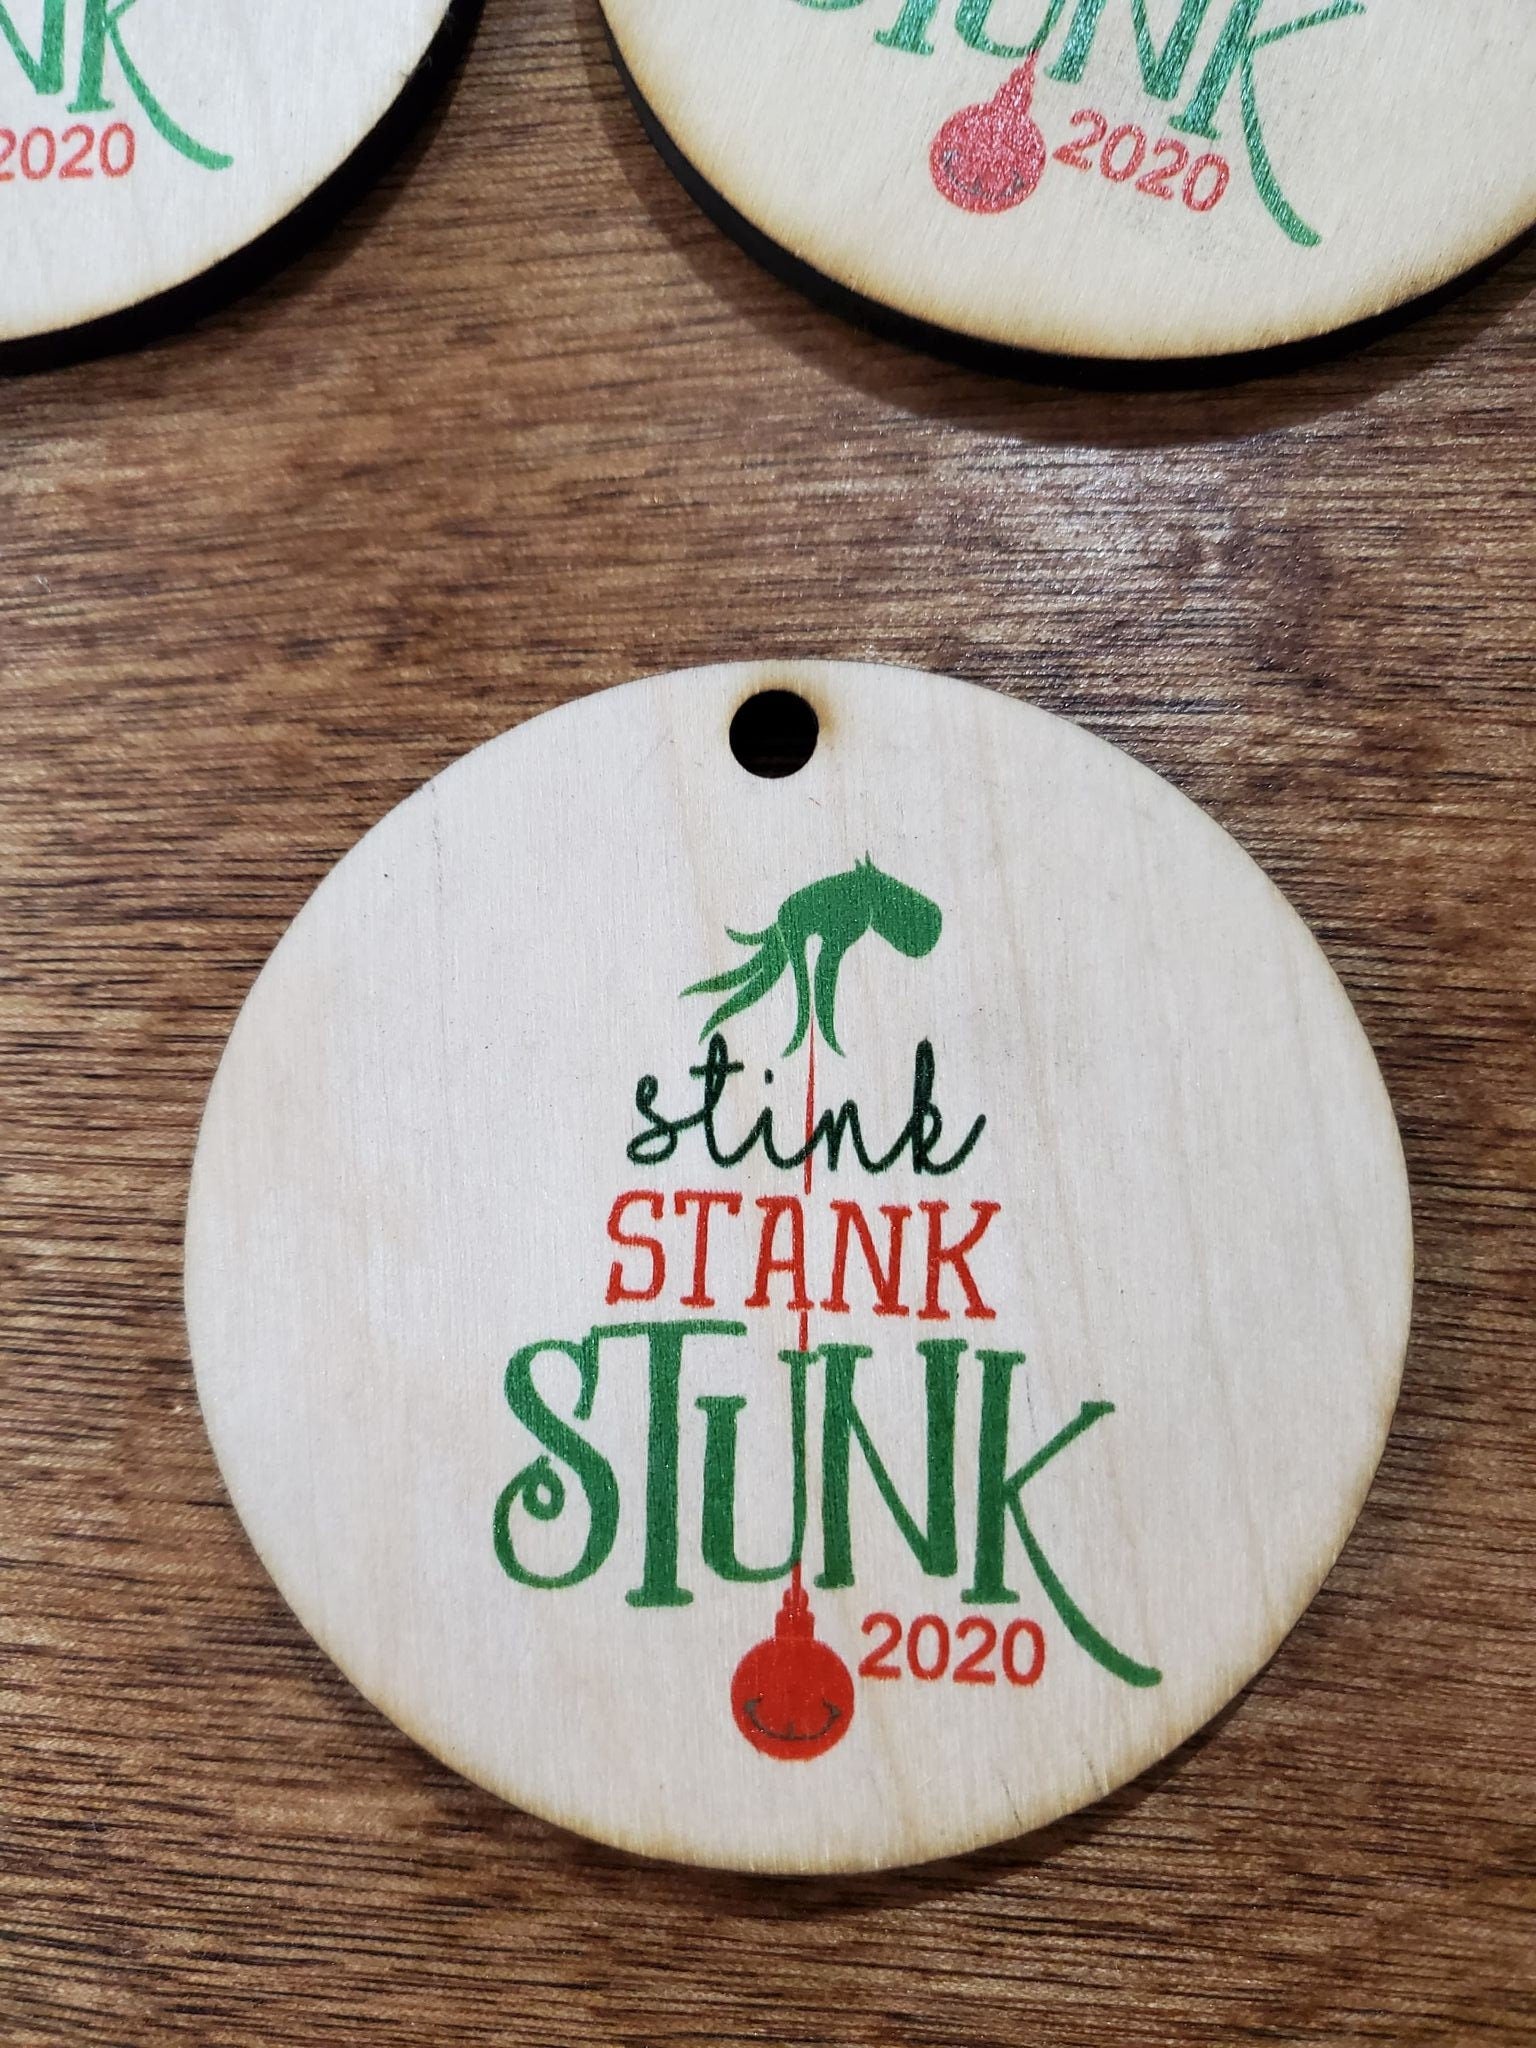 Set of 3 Stink Stank Stunk Ornament 2020 With Date Mean One Christmas Keychain Décor Wood Sign Tree Gift Cute Whoville Hand Green Festive